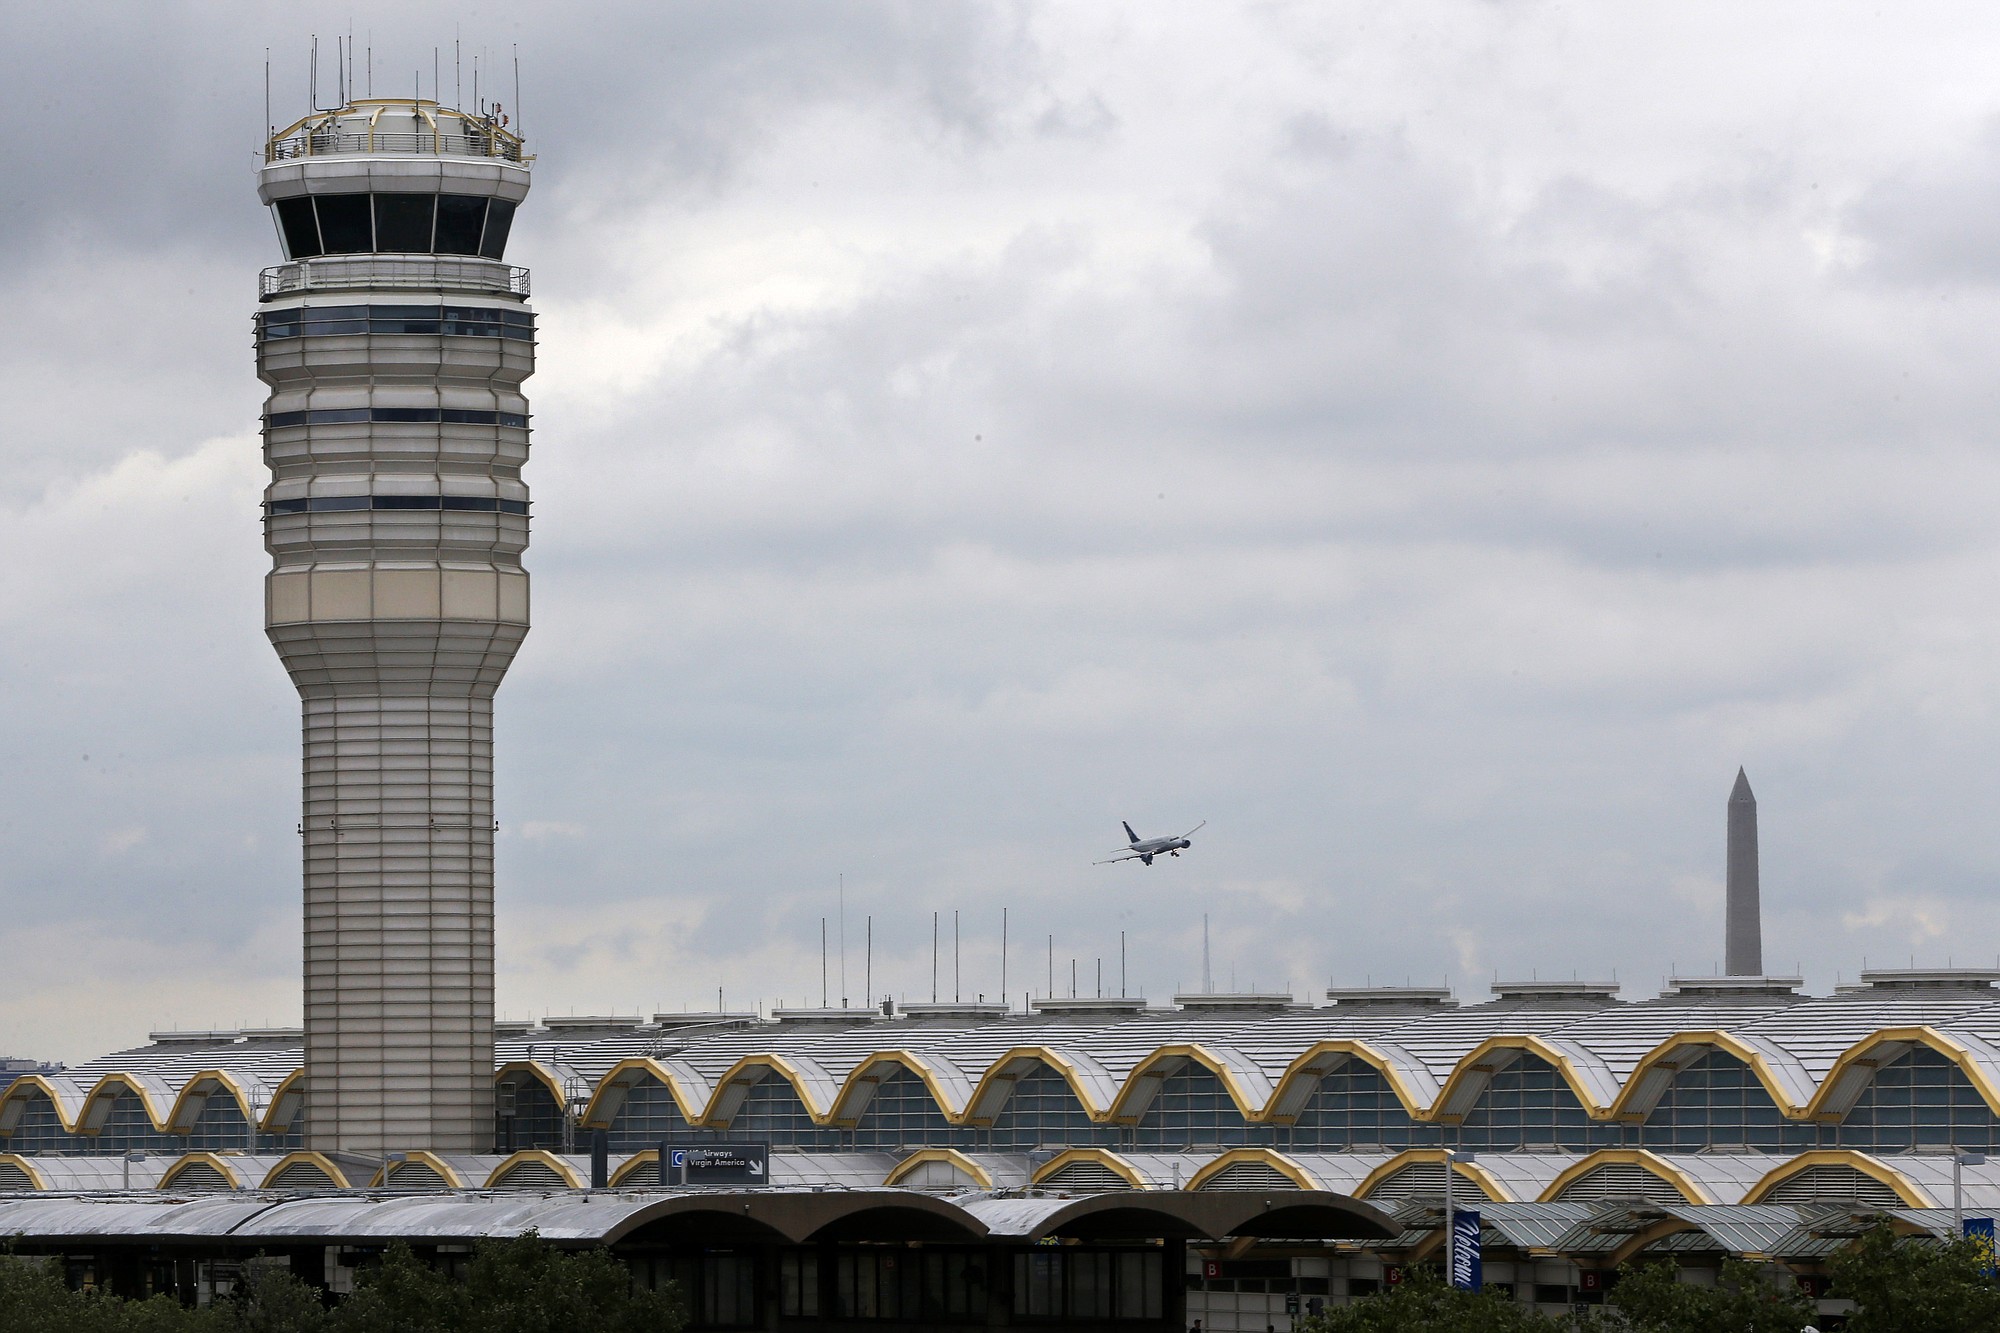 An airplane flies between the air traffic control tower and the Washington Monument on Monday at Washington's Ronald Reagan National Airport.